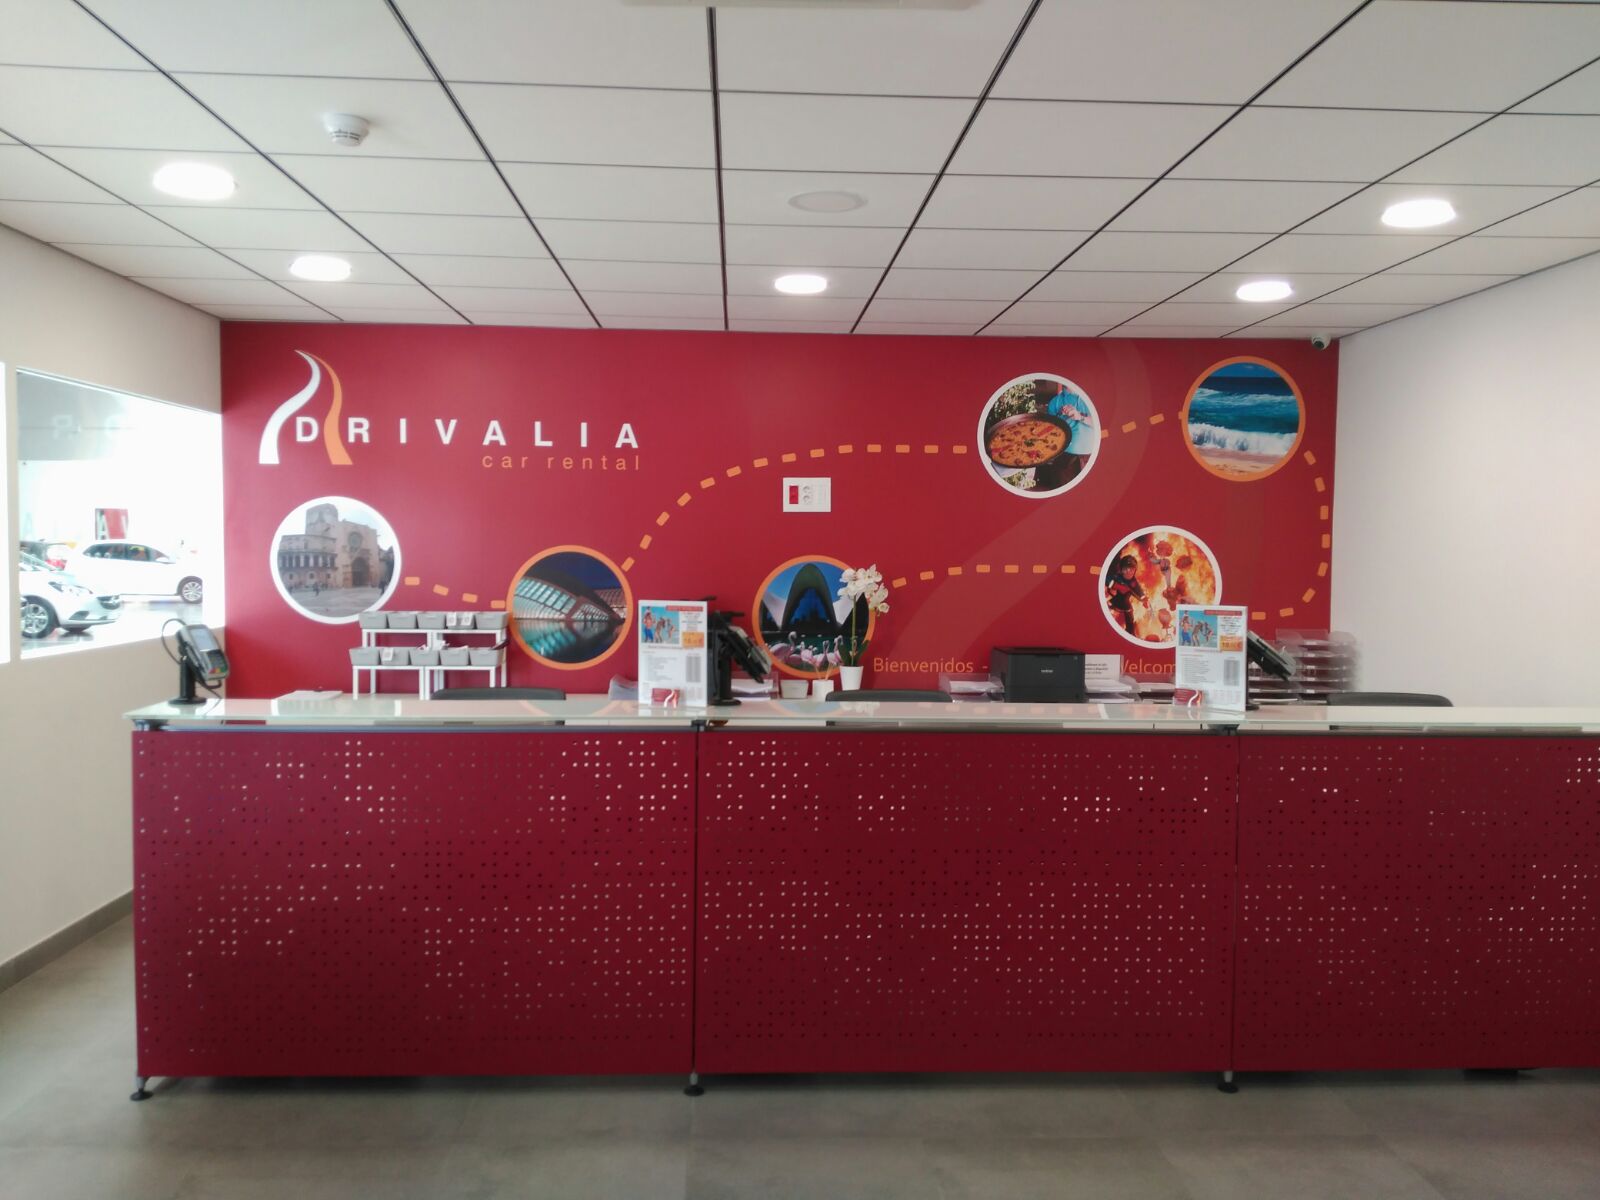 Drivalian reception where we welcome customers to their all-inclusive car hire at Valencia airport